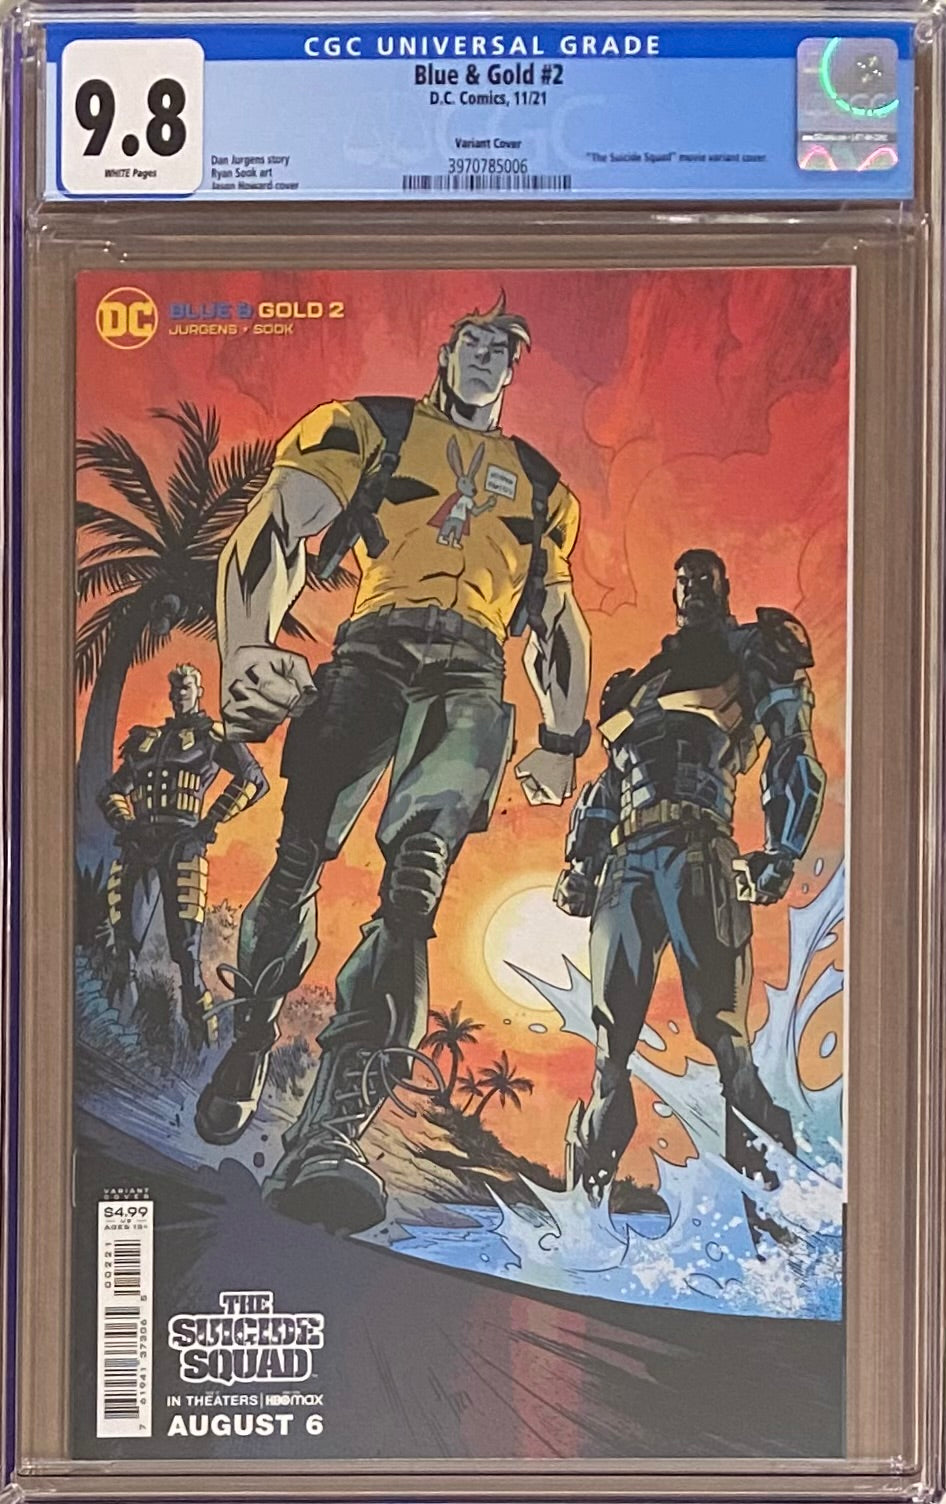 Blue & Gold #2 Howard Suicide Squad Variant CGC 9.8